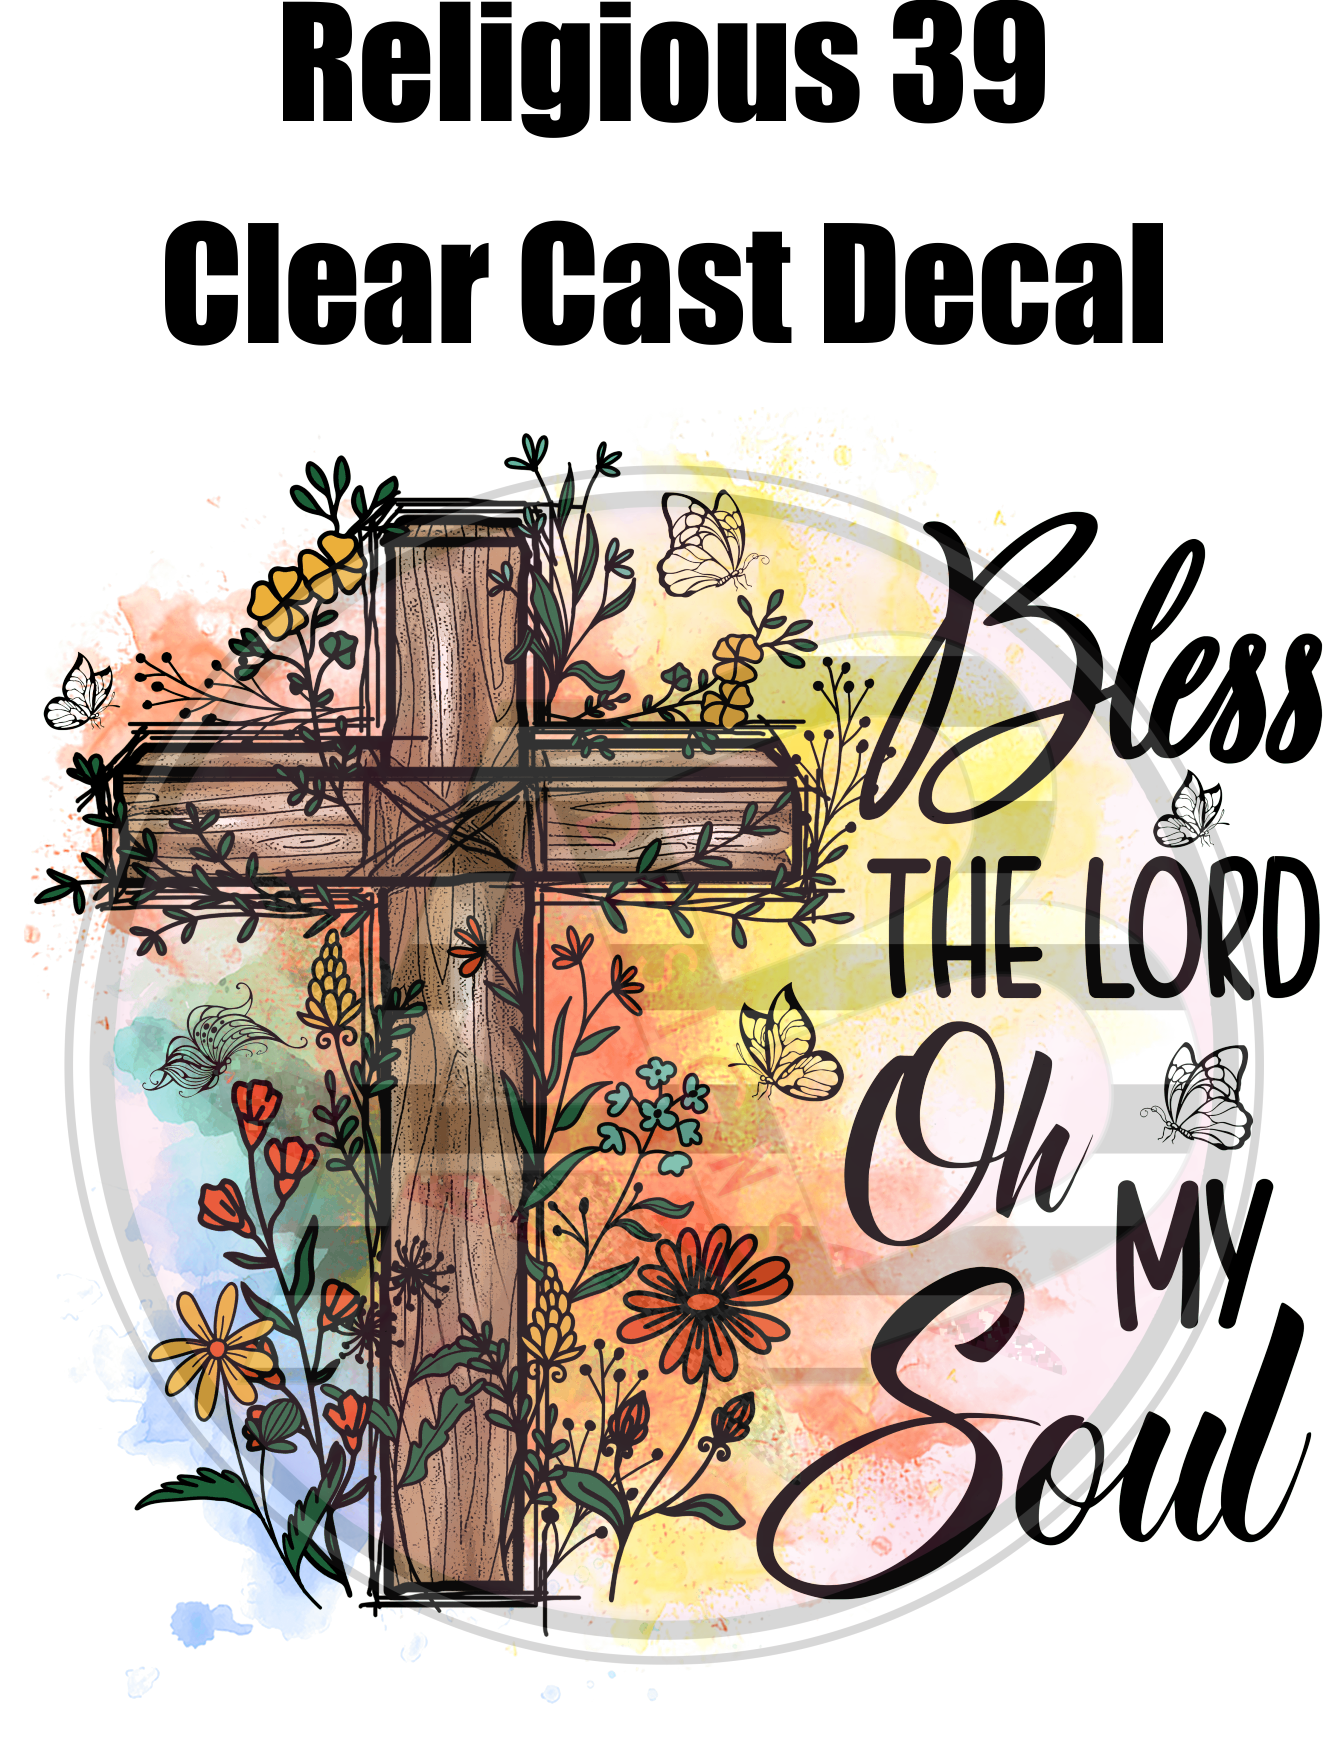 Religious 39 - Clear Cast Decal